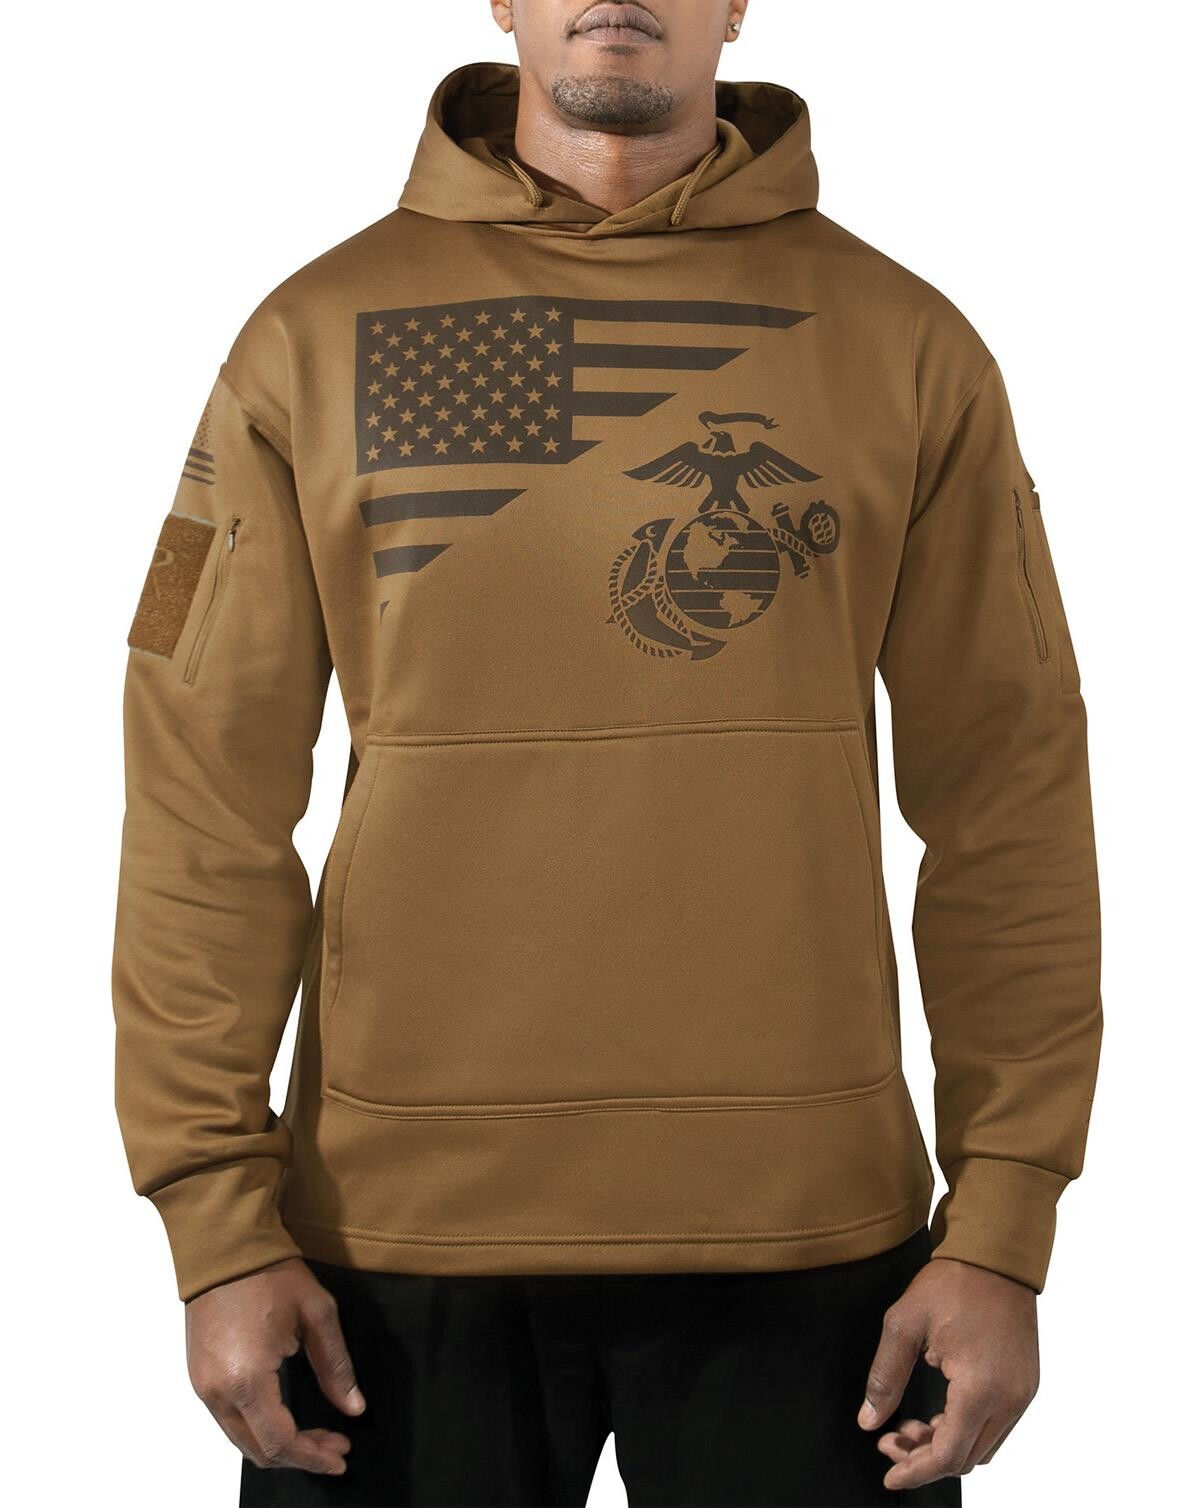 4: Rothco US Flag Concealed Carry Hoodie (Coyote Brun, S)